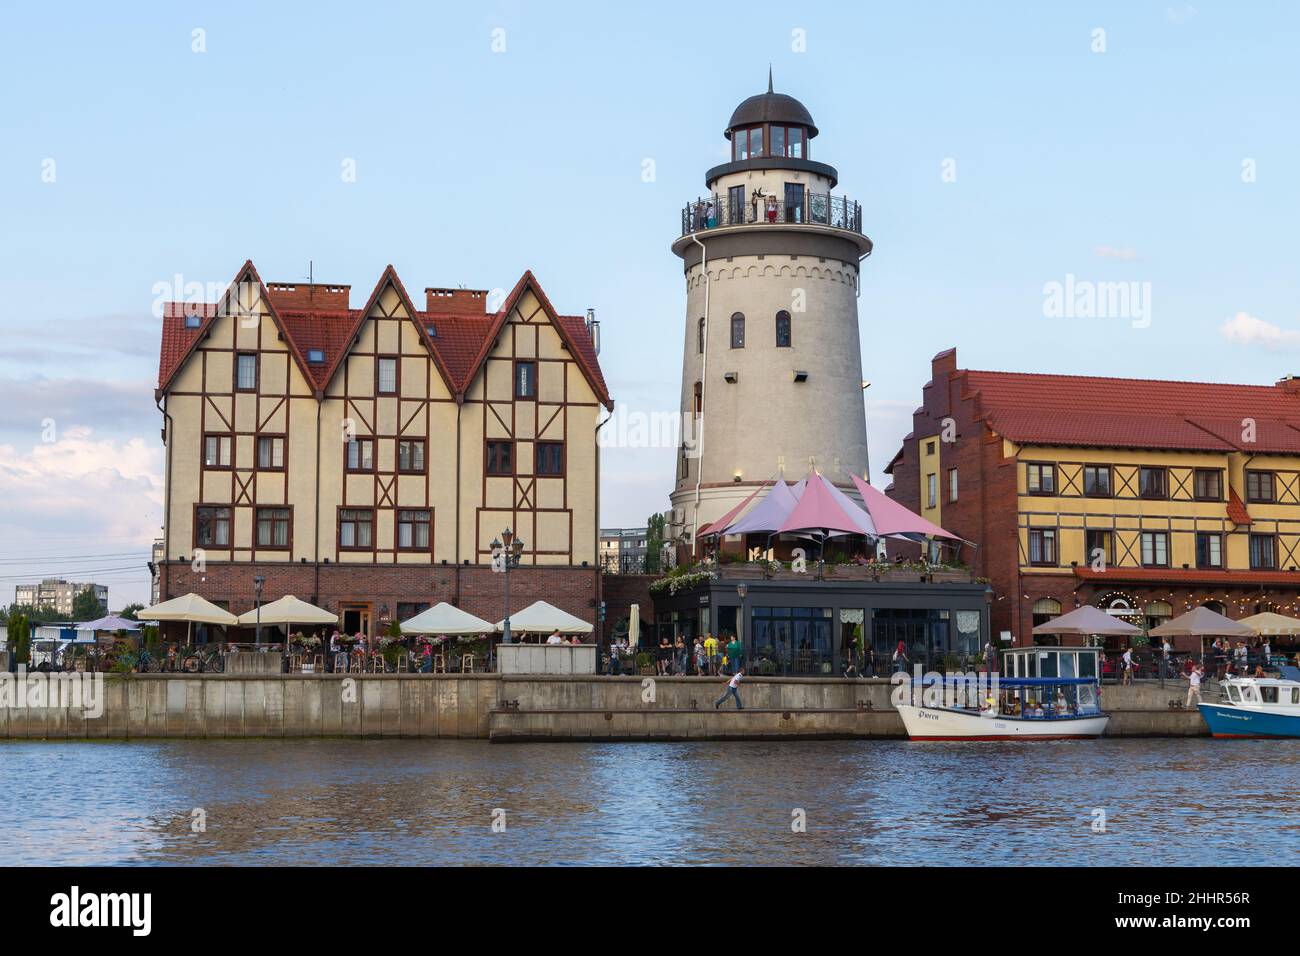 Kaliningrad, Russia - July 30, 2021: Coastal view of the Fishing village, district of Kaliningrad city, cityscape photo with lighthouse tower and hote Stock Photo